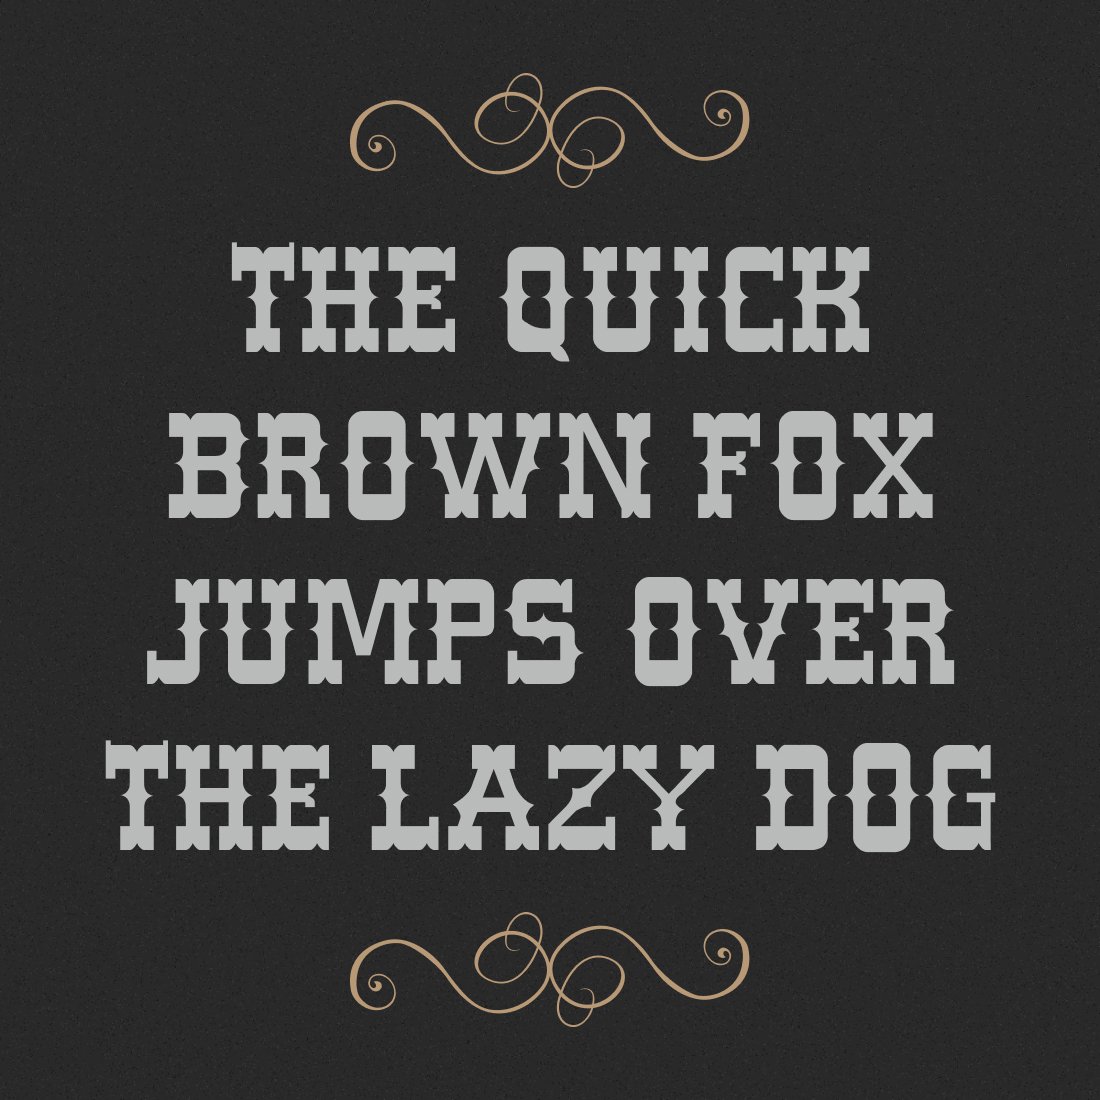 Retro font in craft style.